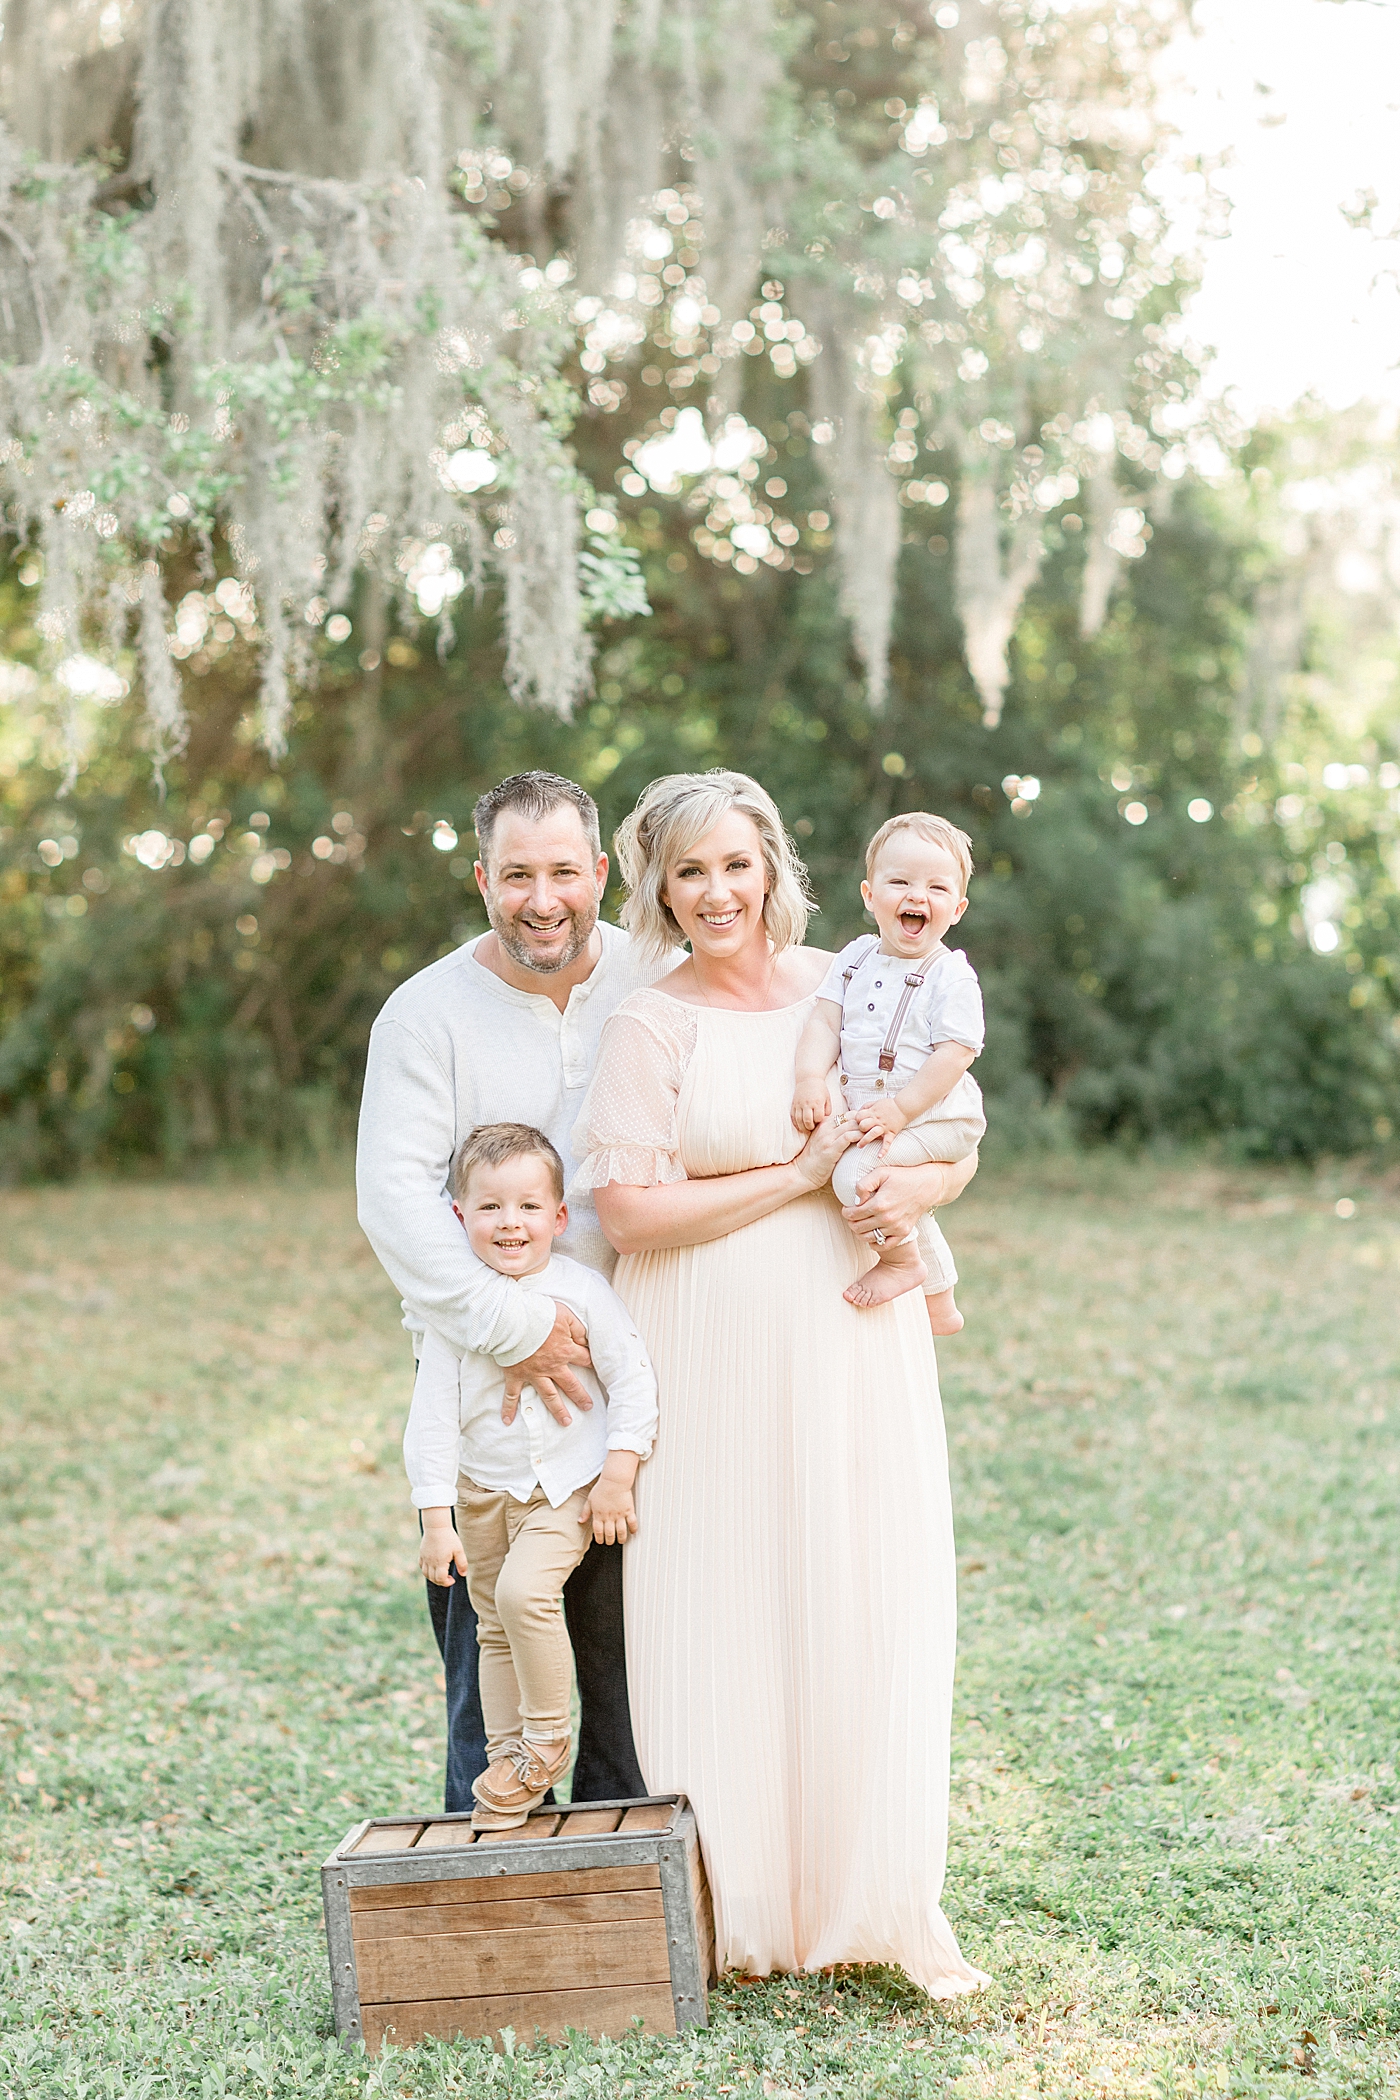 Outdoor family portrait at sunset with Brittany Elise Photography in Tampa, Fl. 